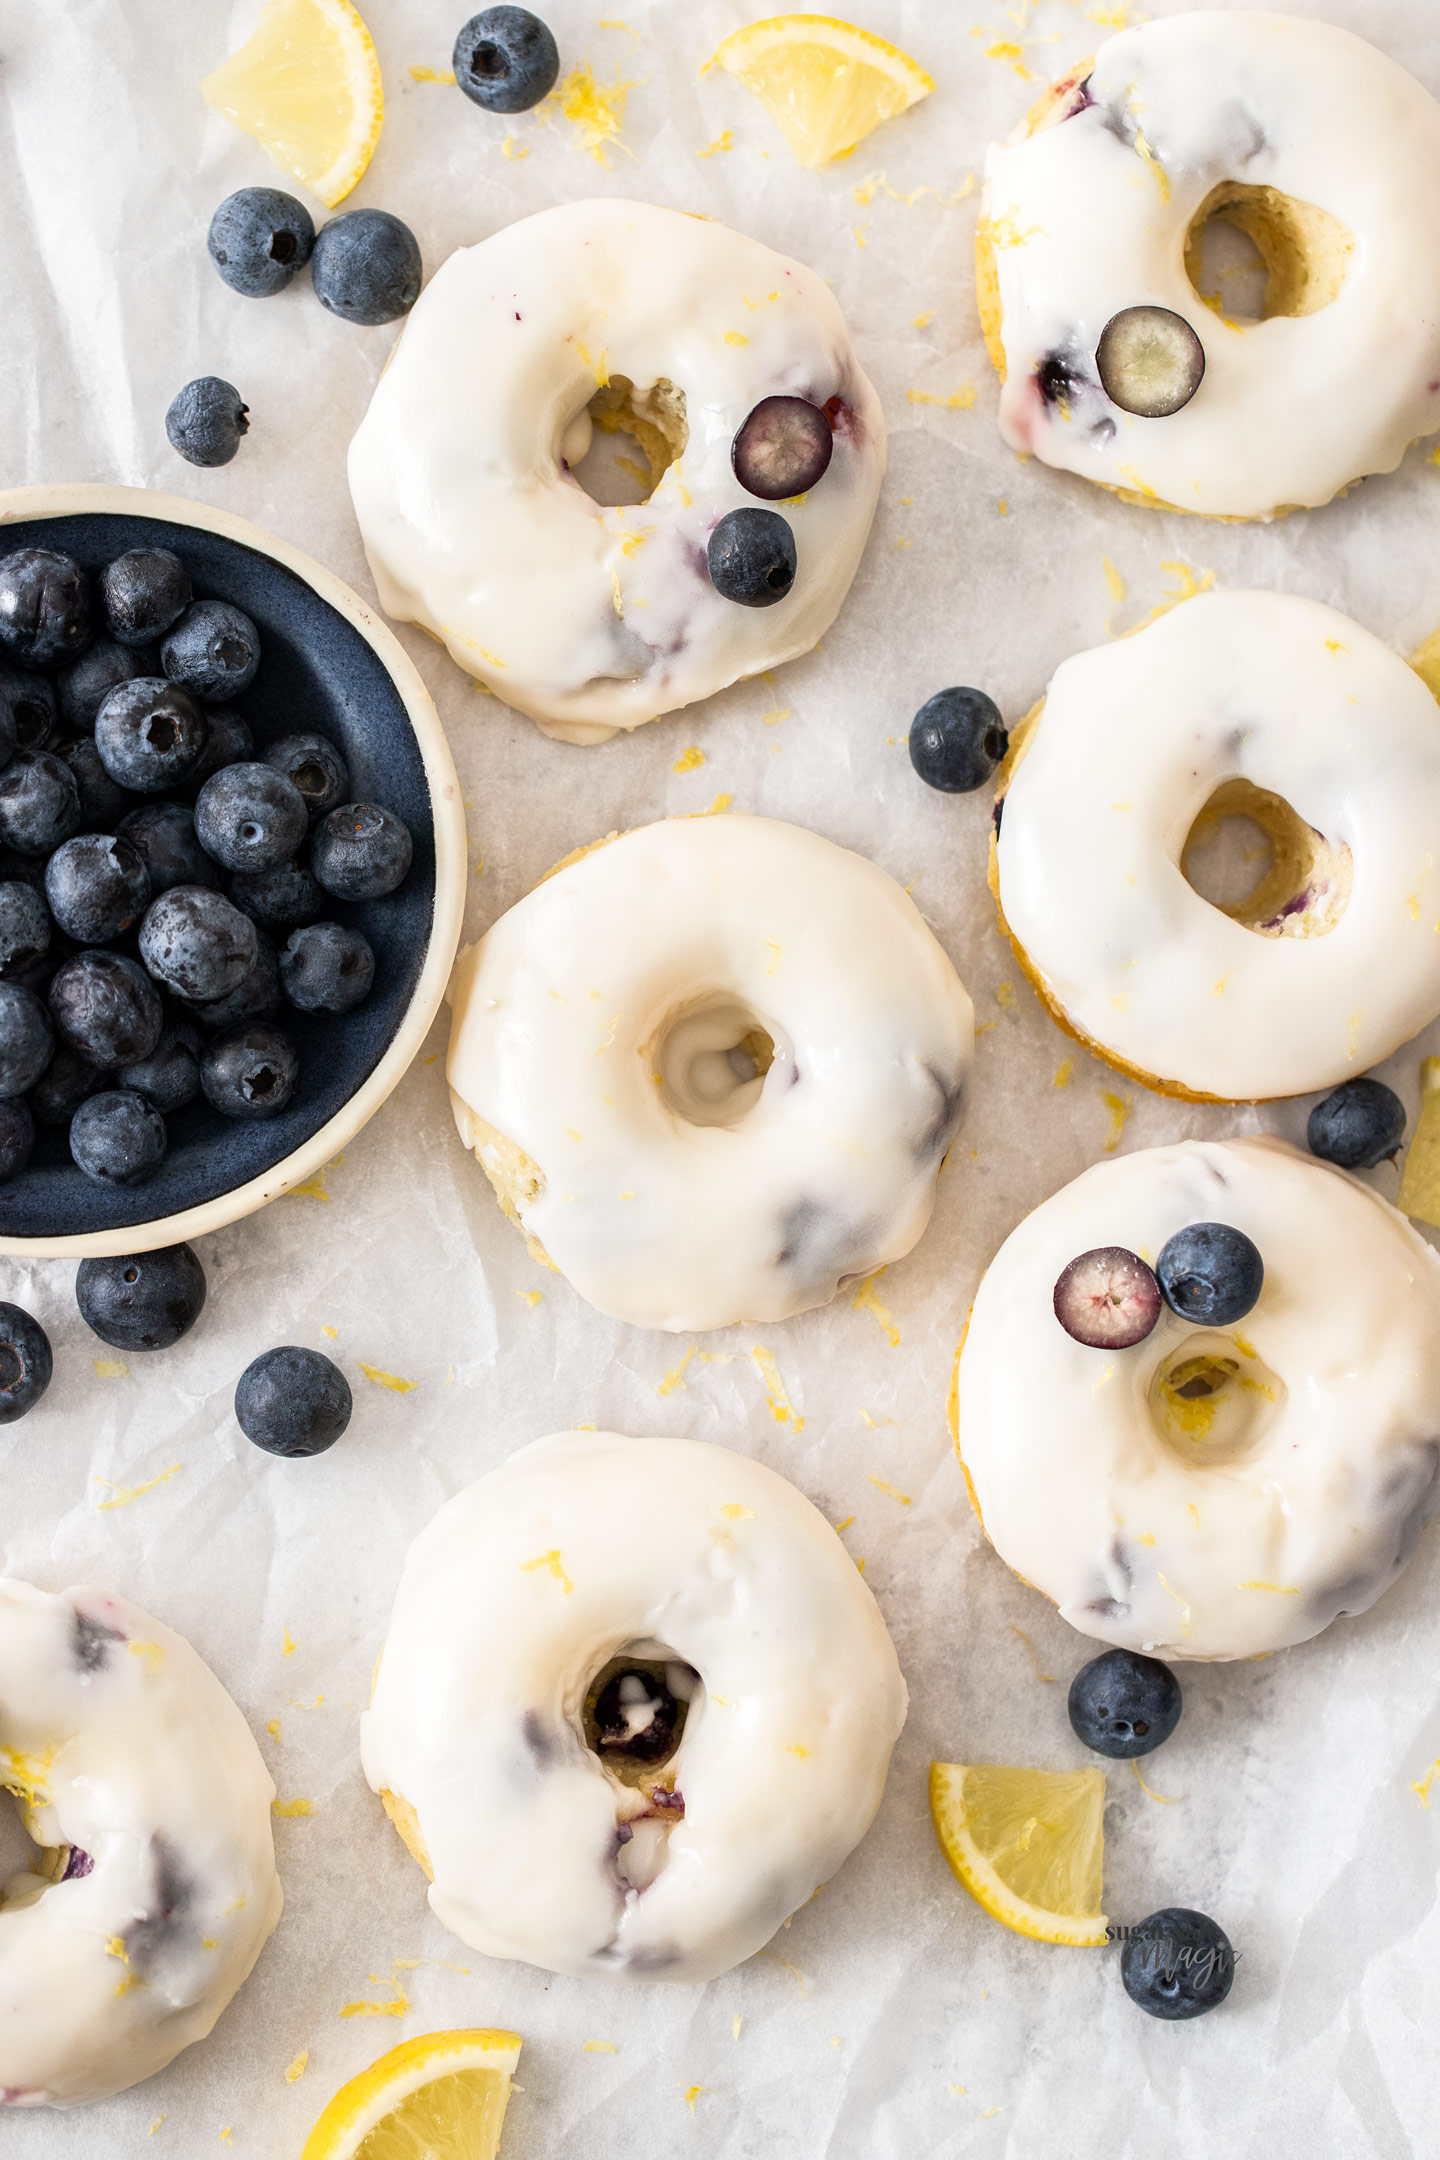 Top down view of 7 blueberry cake donuts with icing.